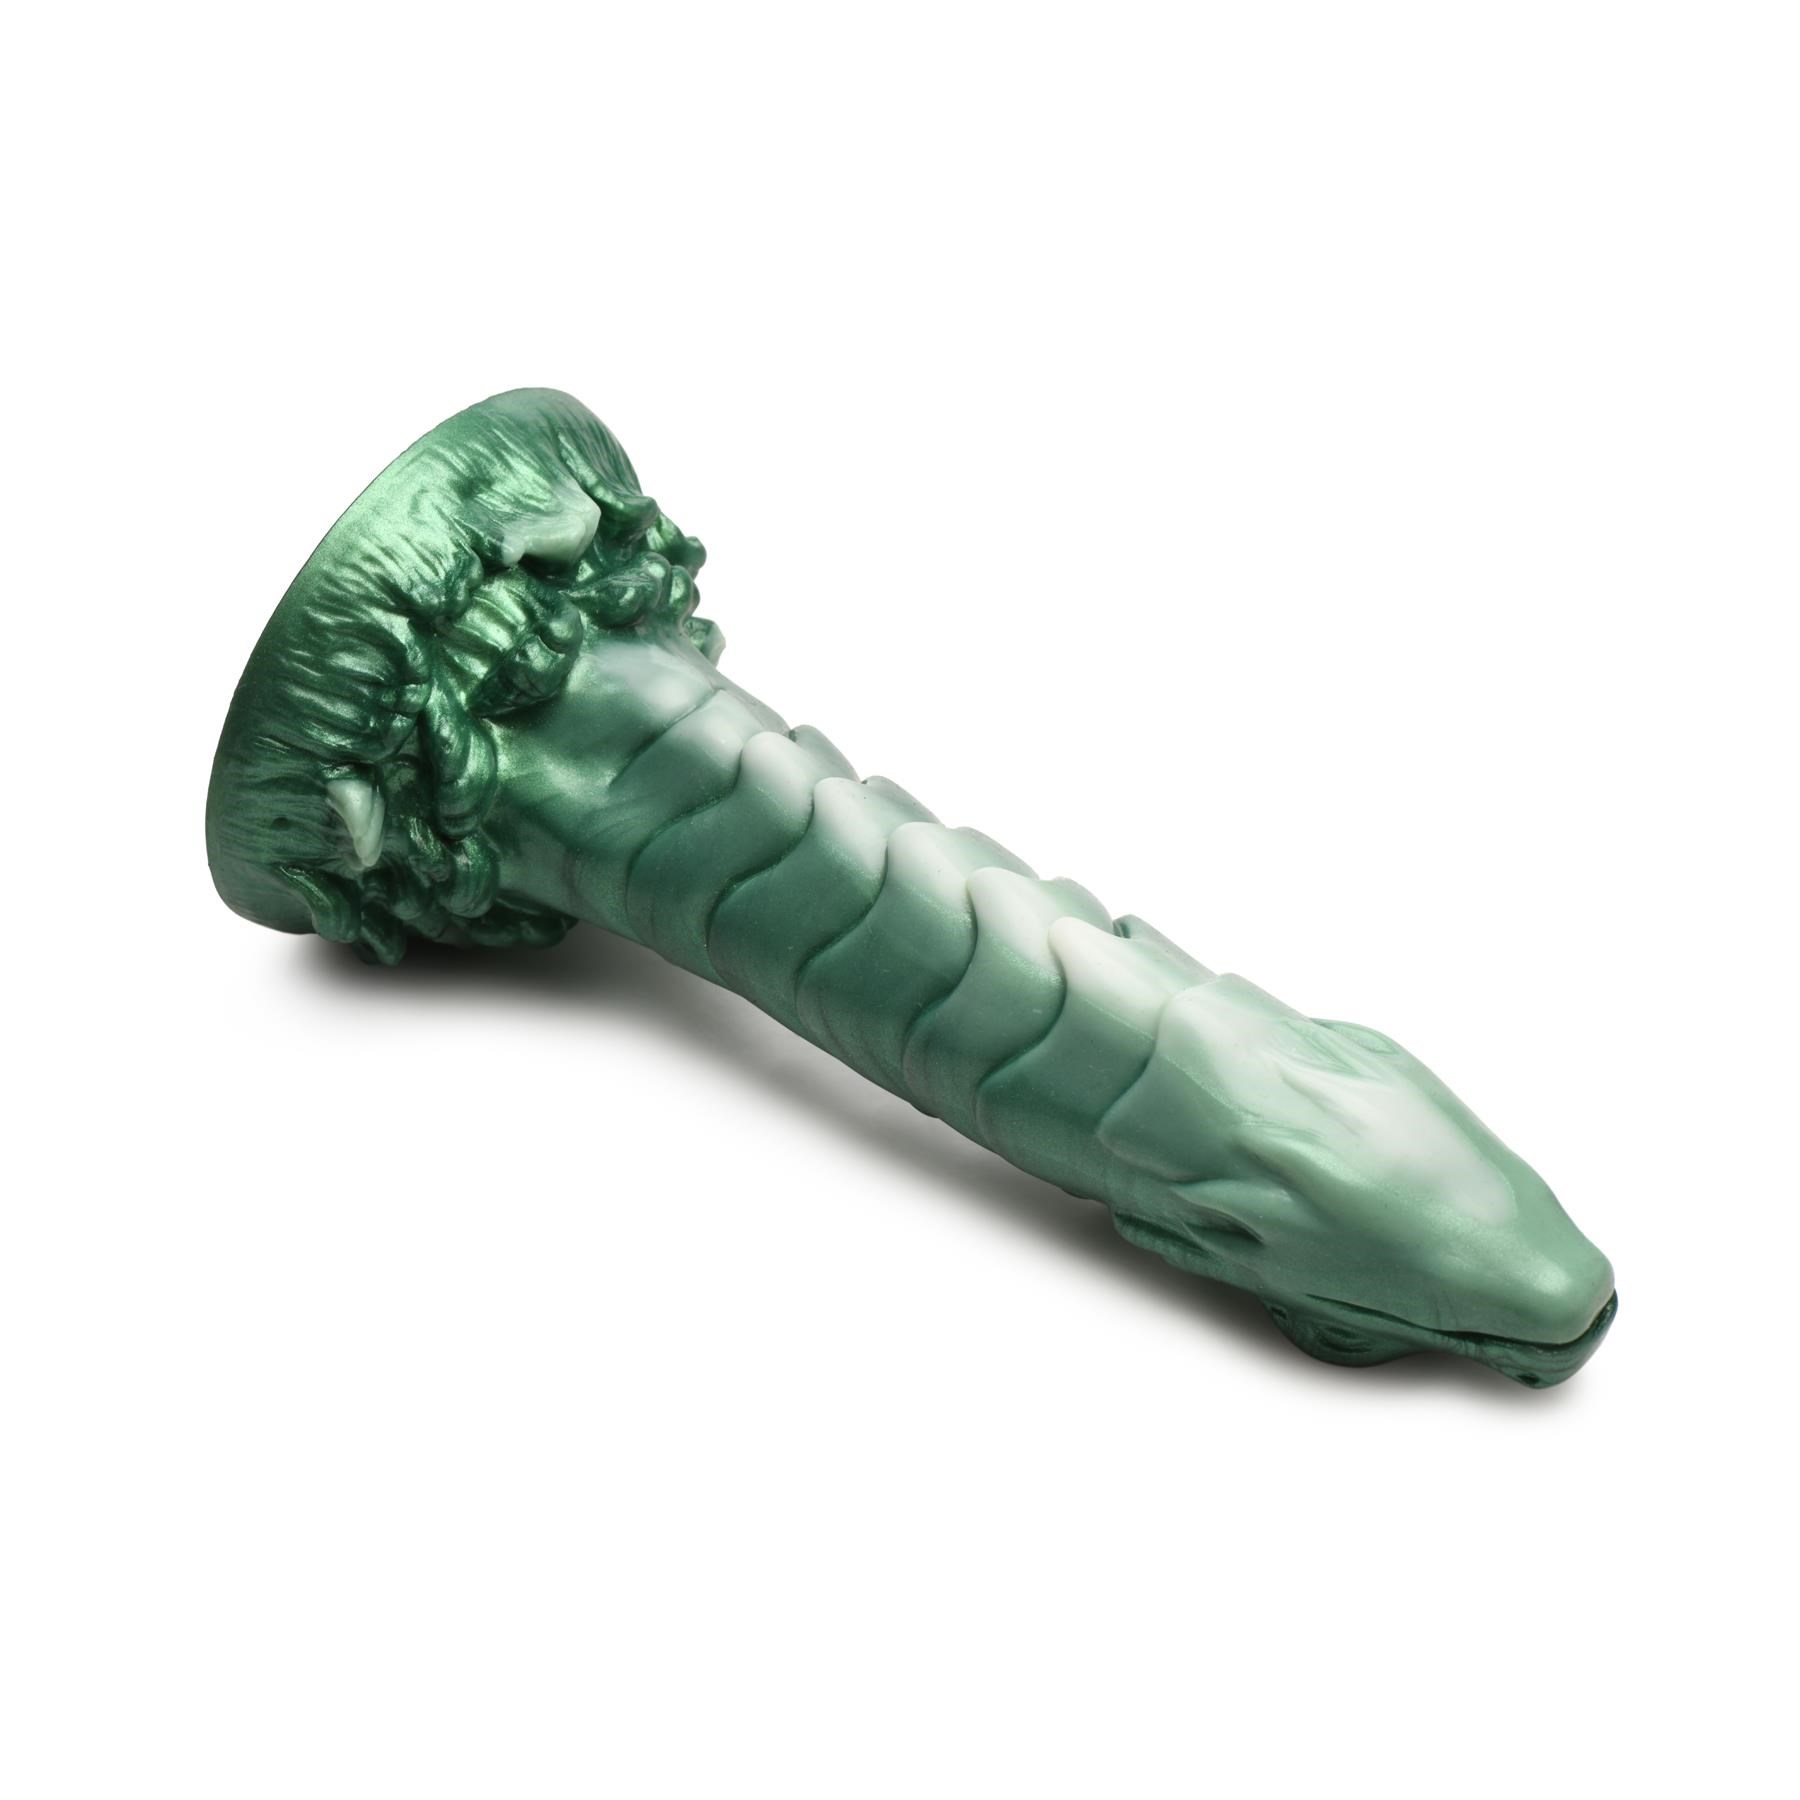 CreatureCocks Cockness Monster Silicone Dildo - Product Shot #6